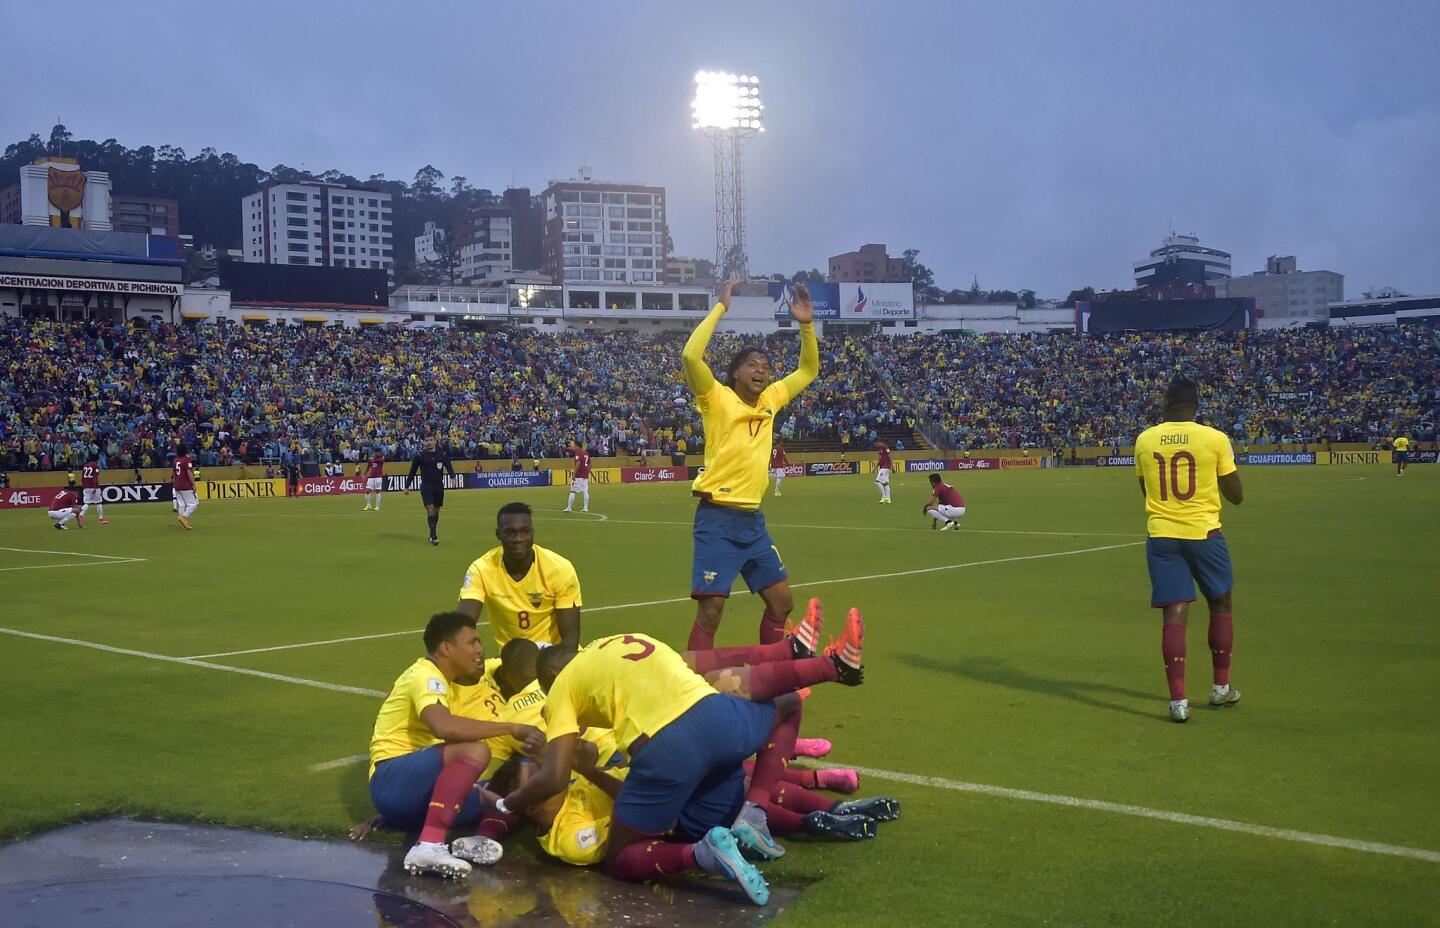 Ecuador's players celebrate after forward Miler Bolanos (on the ground) scored against Bolivia during their Russia 2018 FIFA World Cup South American Qualifiers football match, at the Estadio Olimpico Atahualpa stadium in Quito, on October 13, 2015. AFP PHOTO / RODRIGO BUENDIARODRIGO BUENDIA/AFP/Getty Images ** OUTS - ELSENT, FPG, CM - OUTS * NM, PH, VA if sourced by CT, LA or MoD **